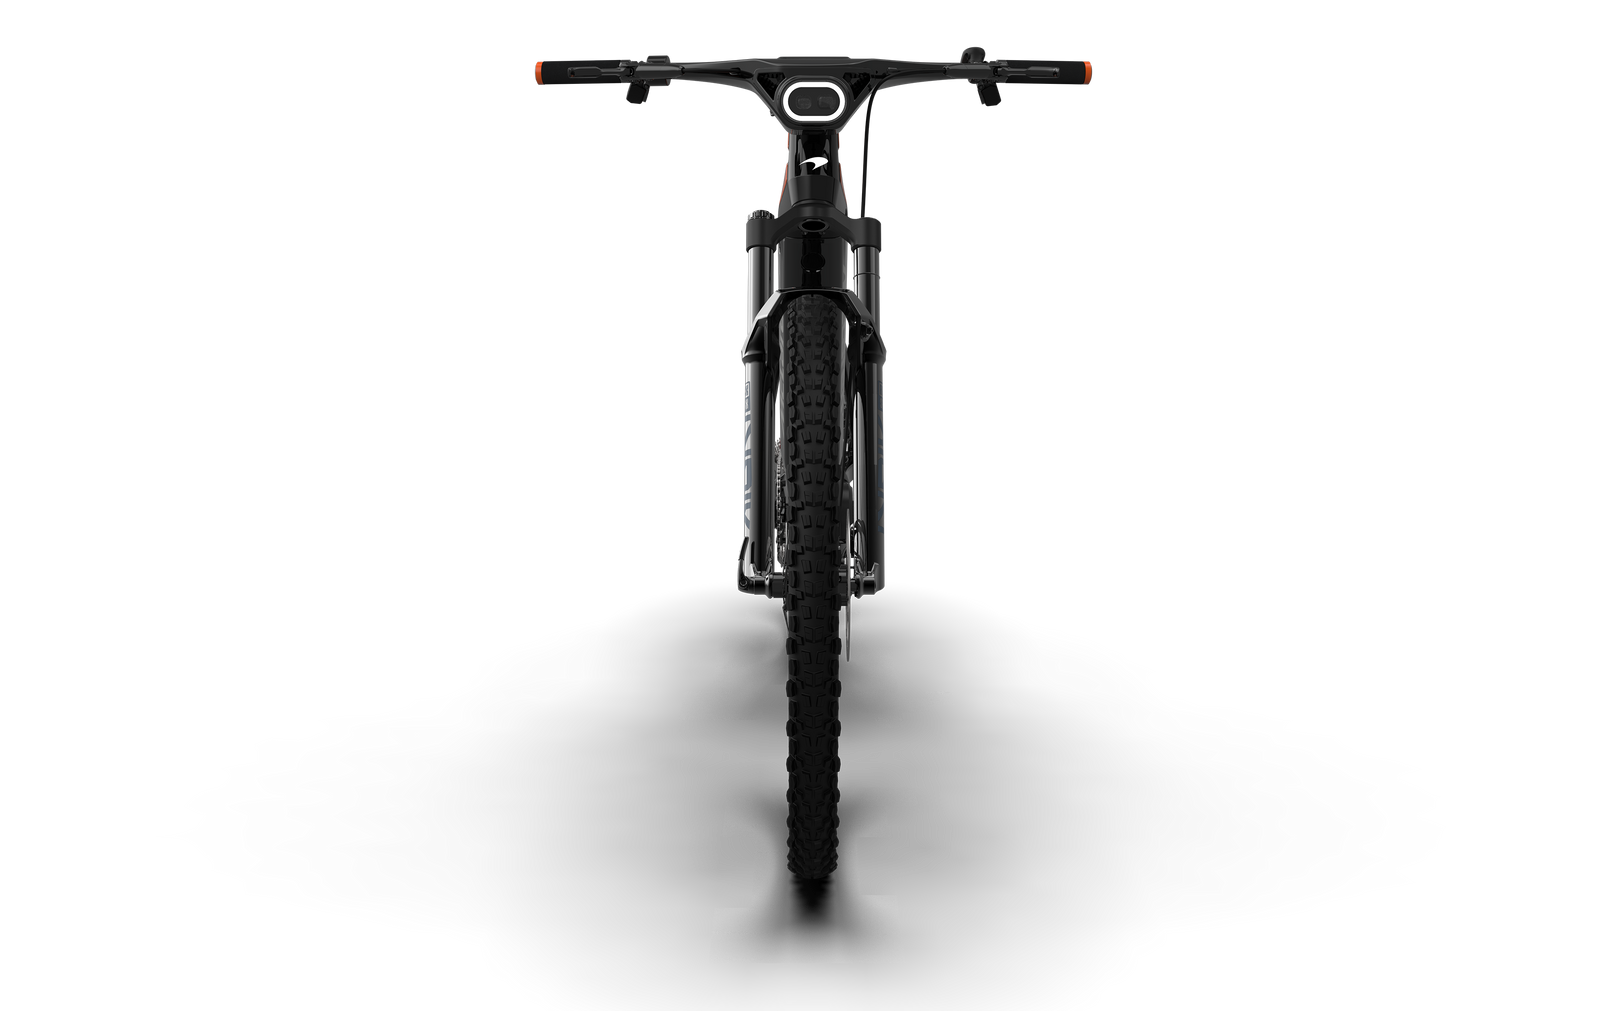 Head on view of the McLaren Extreme full-suspension e-mountain bike showing the integrated headlamp, McLaren head tube badge, and front view of Rock Shox Lyrik fork. 